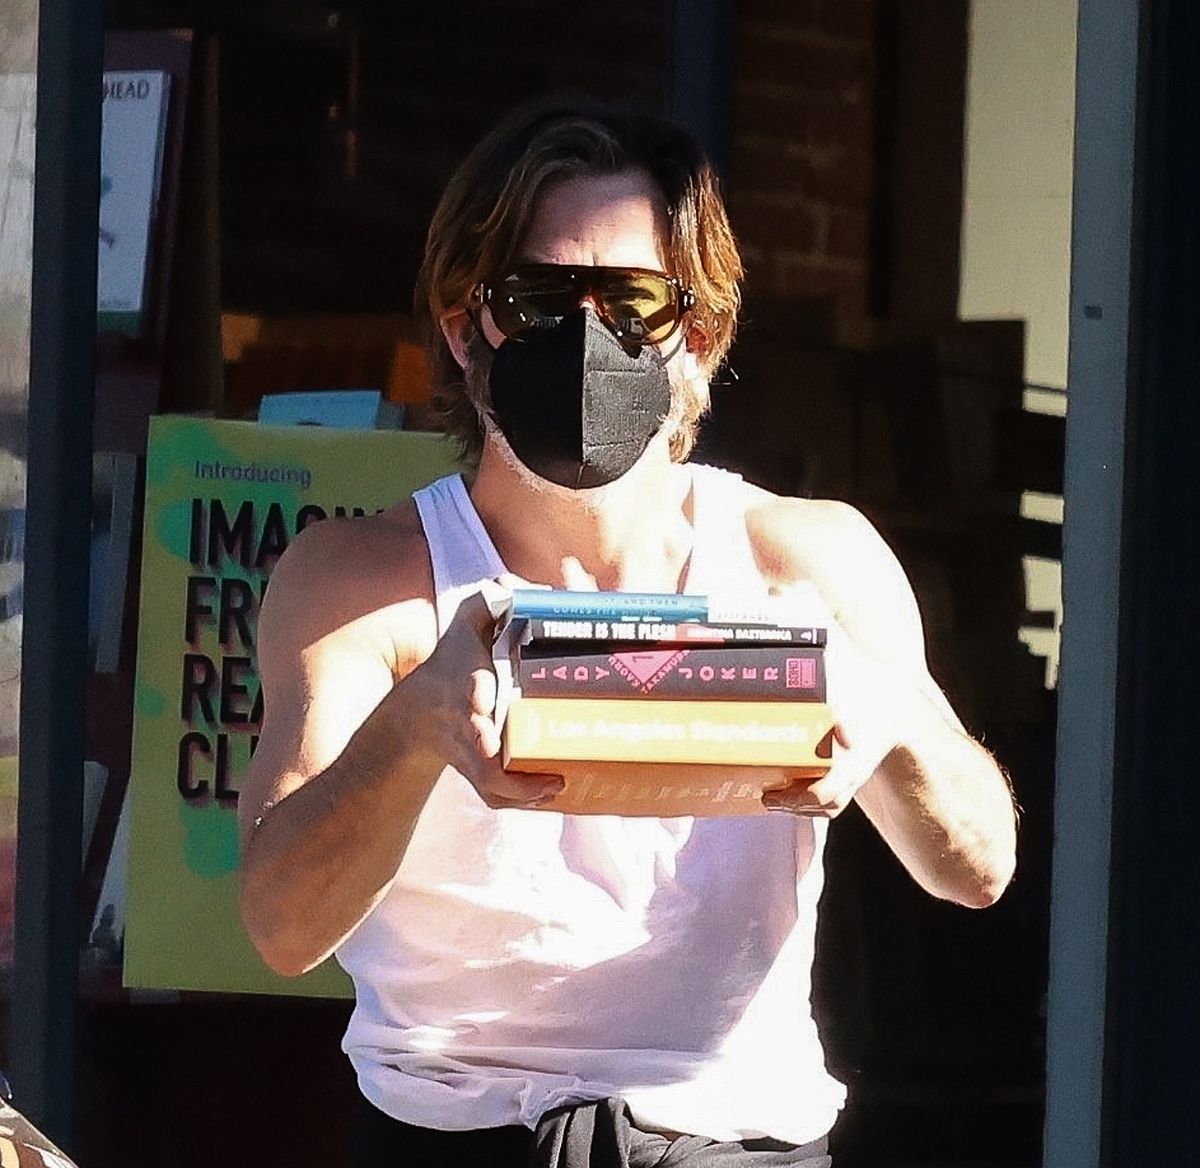 los feliz, ca    exclusive    chris pine stops at asmall local bookstore to pick up some new reading material while out running errands on a sunday morning the actor left with a stack of about 4 books among them, summer light and then comes the night  and lady jokerpictured chris pinebackgrid usa 9 january 2022 usa 1 310 798 9111  usasalesbackgridcomuk 44 208 344 2007  uksalesbackgridcomuk clients   pictures containing childrenplease pixelate face prior to publication